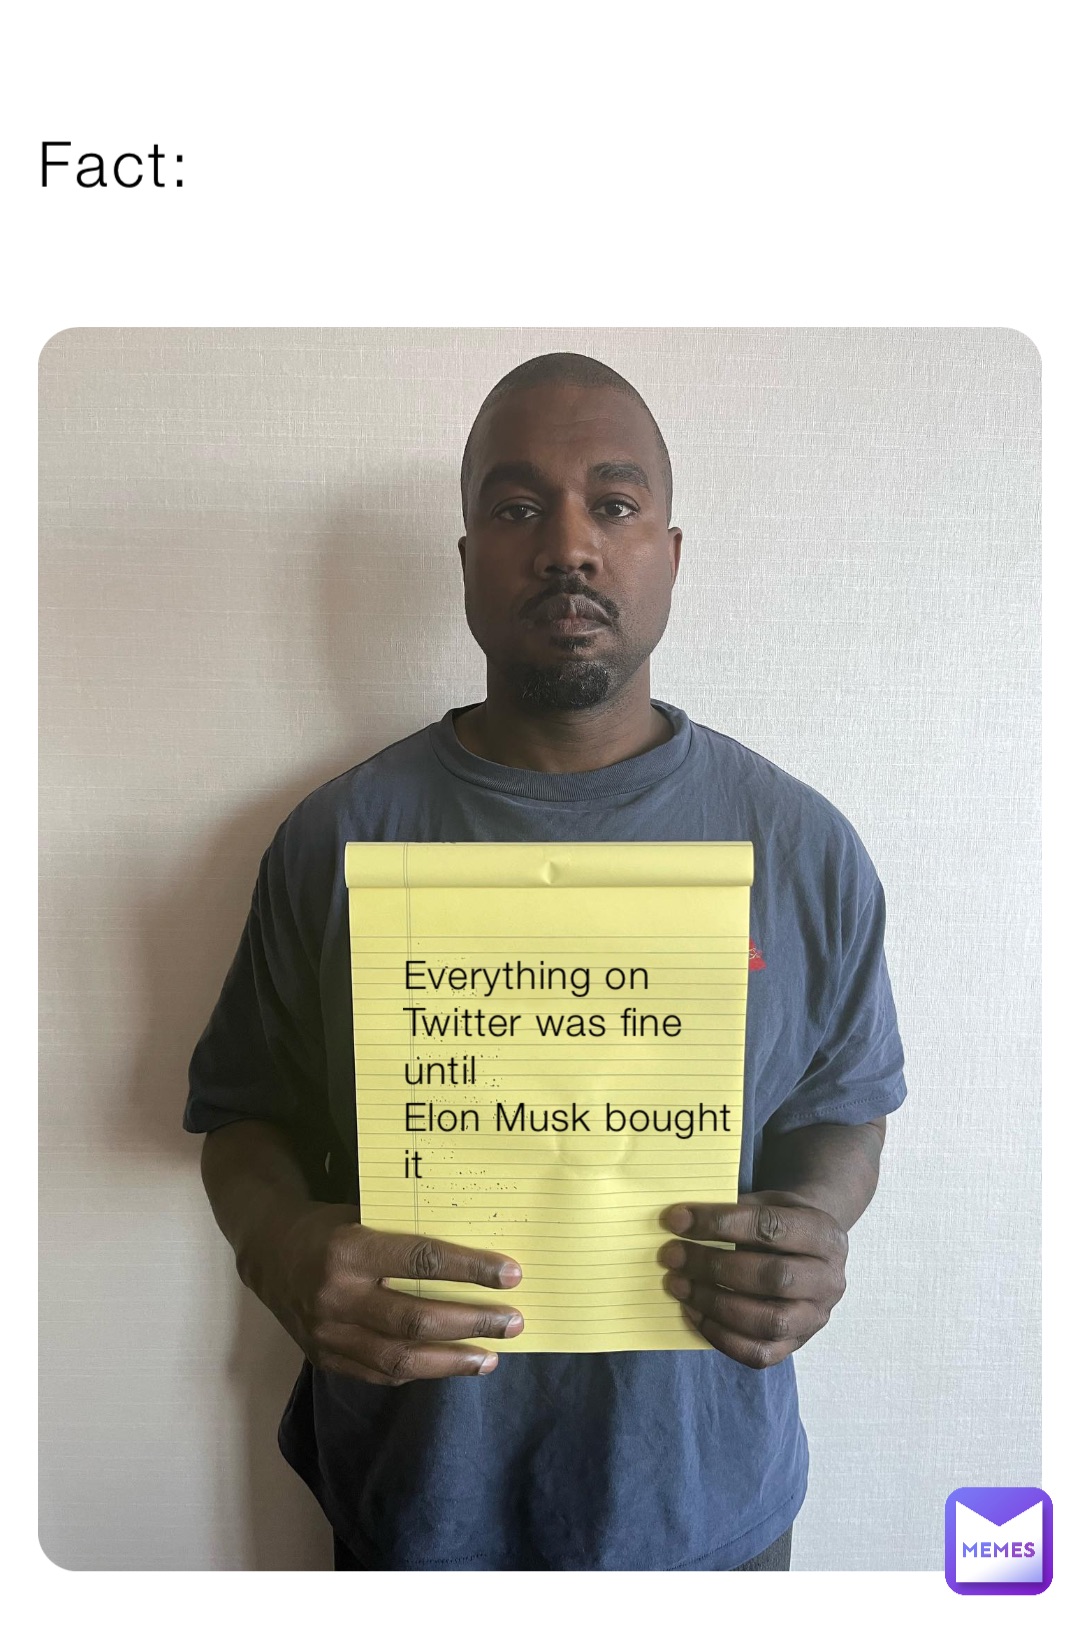 Fact: Everything on Twitter was fine until 
Elon Musk bought it